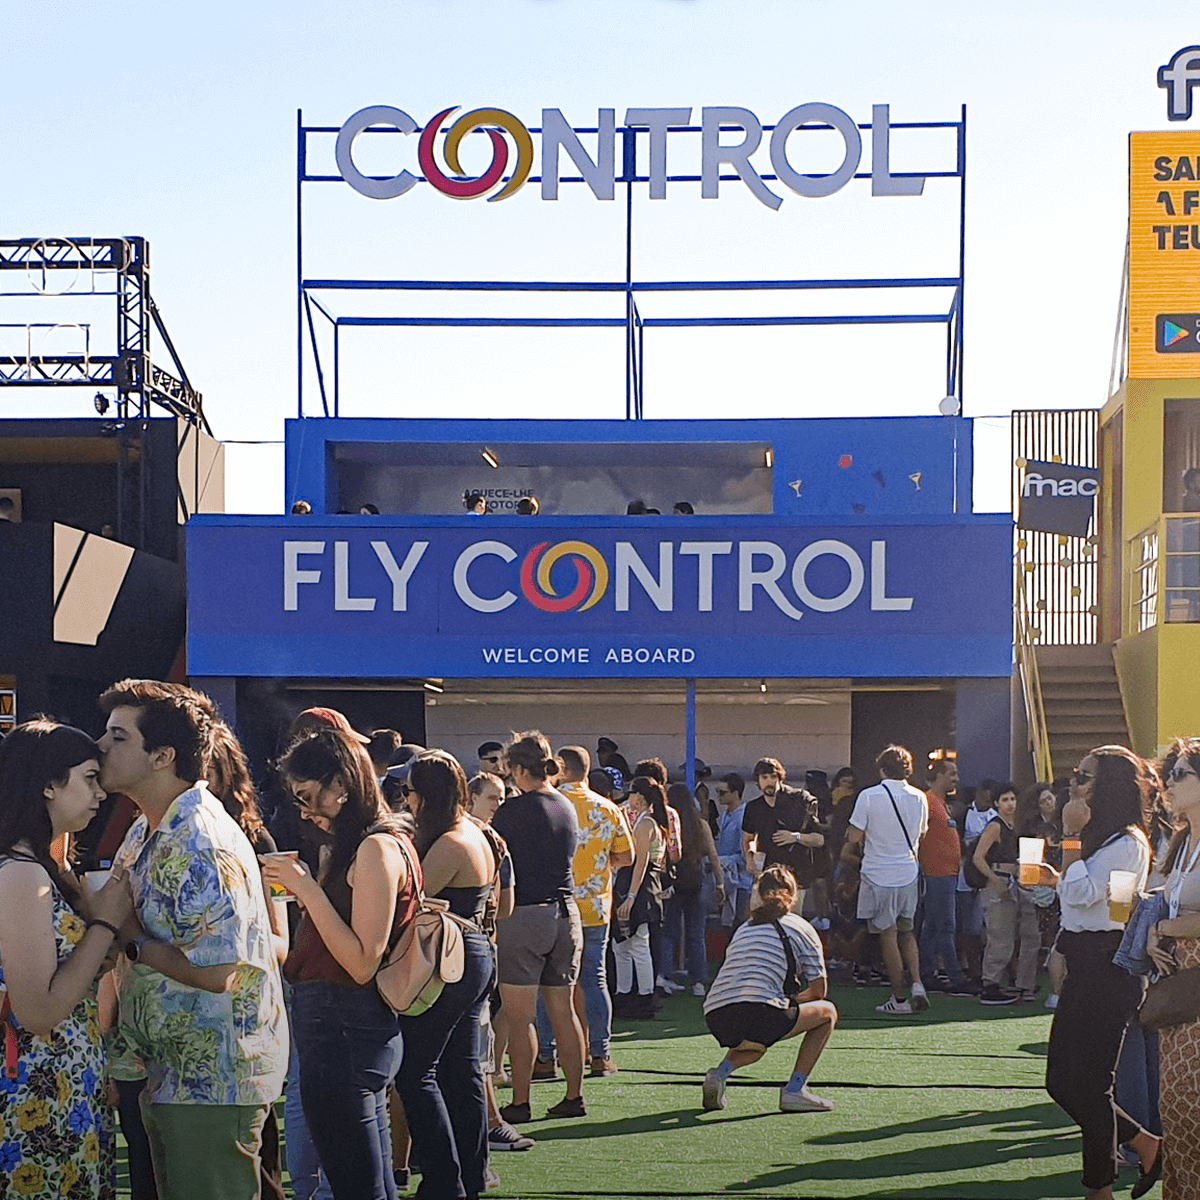 Fly Control